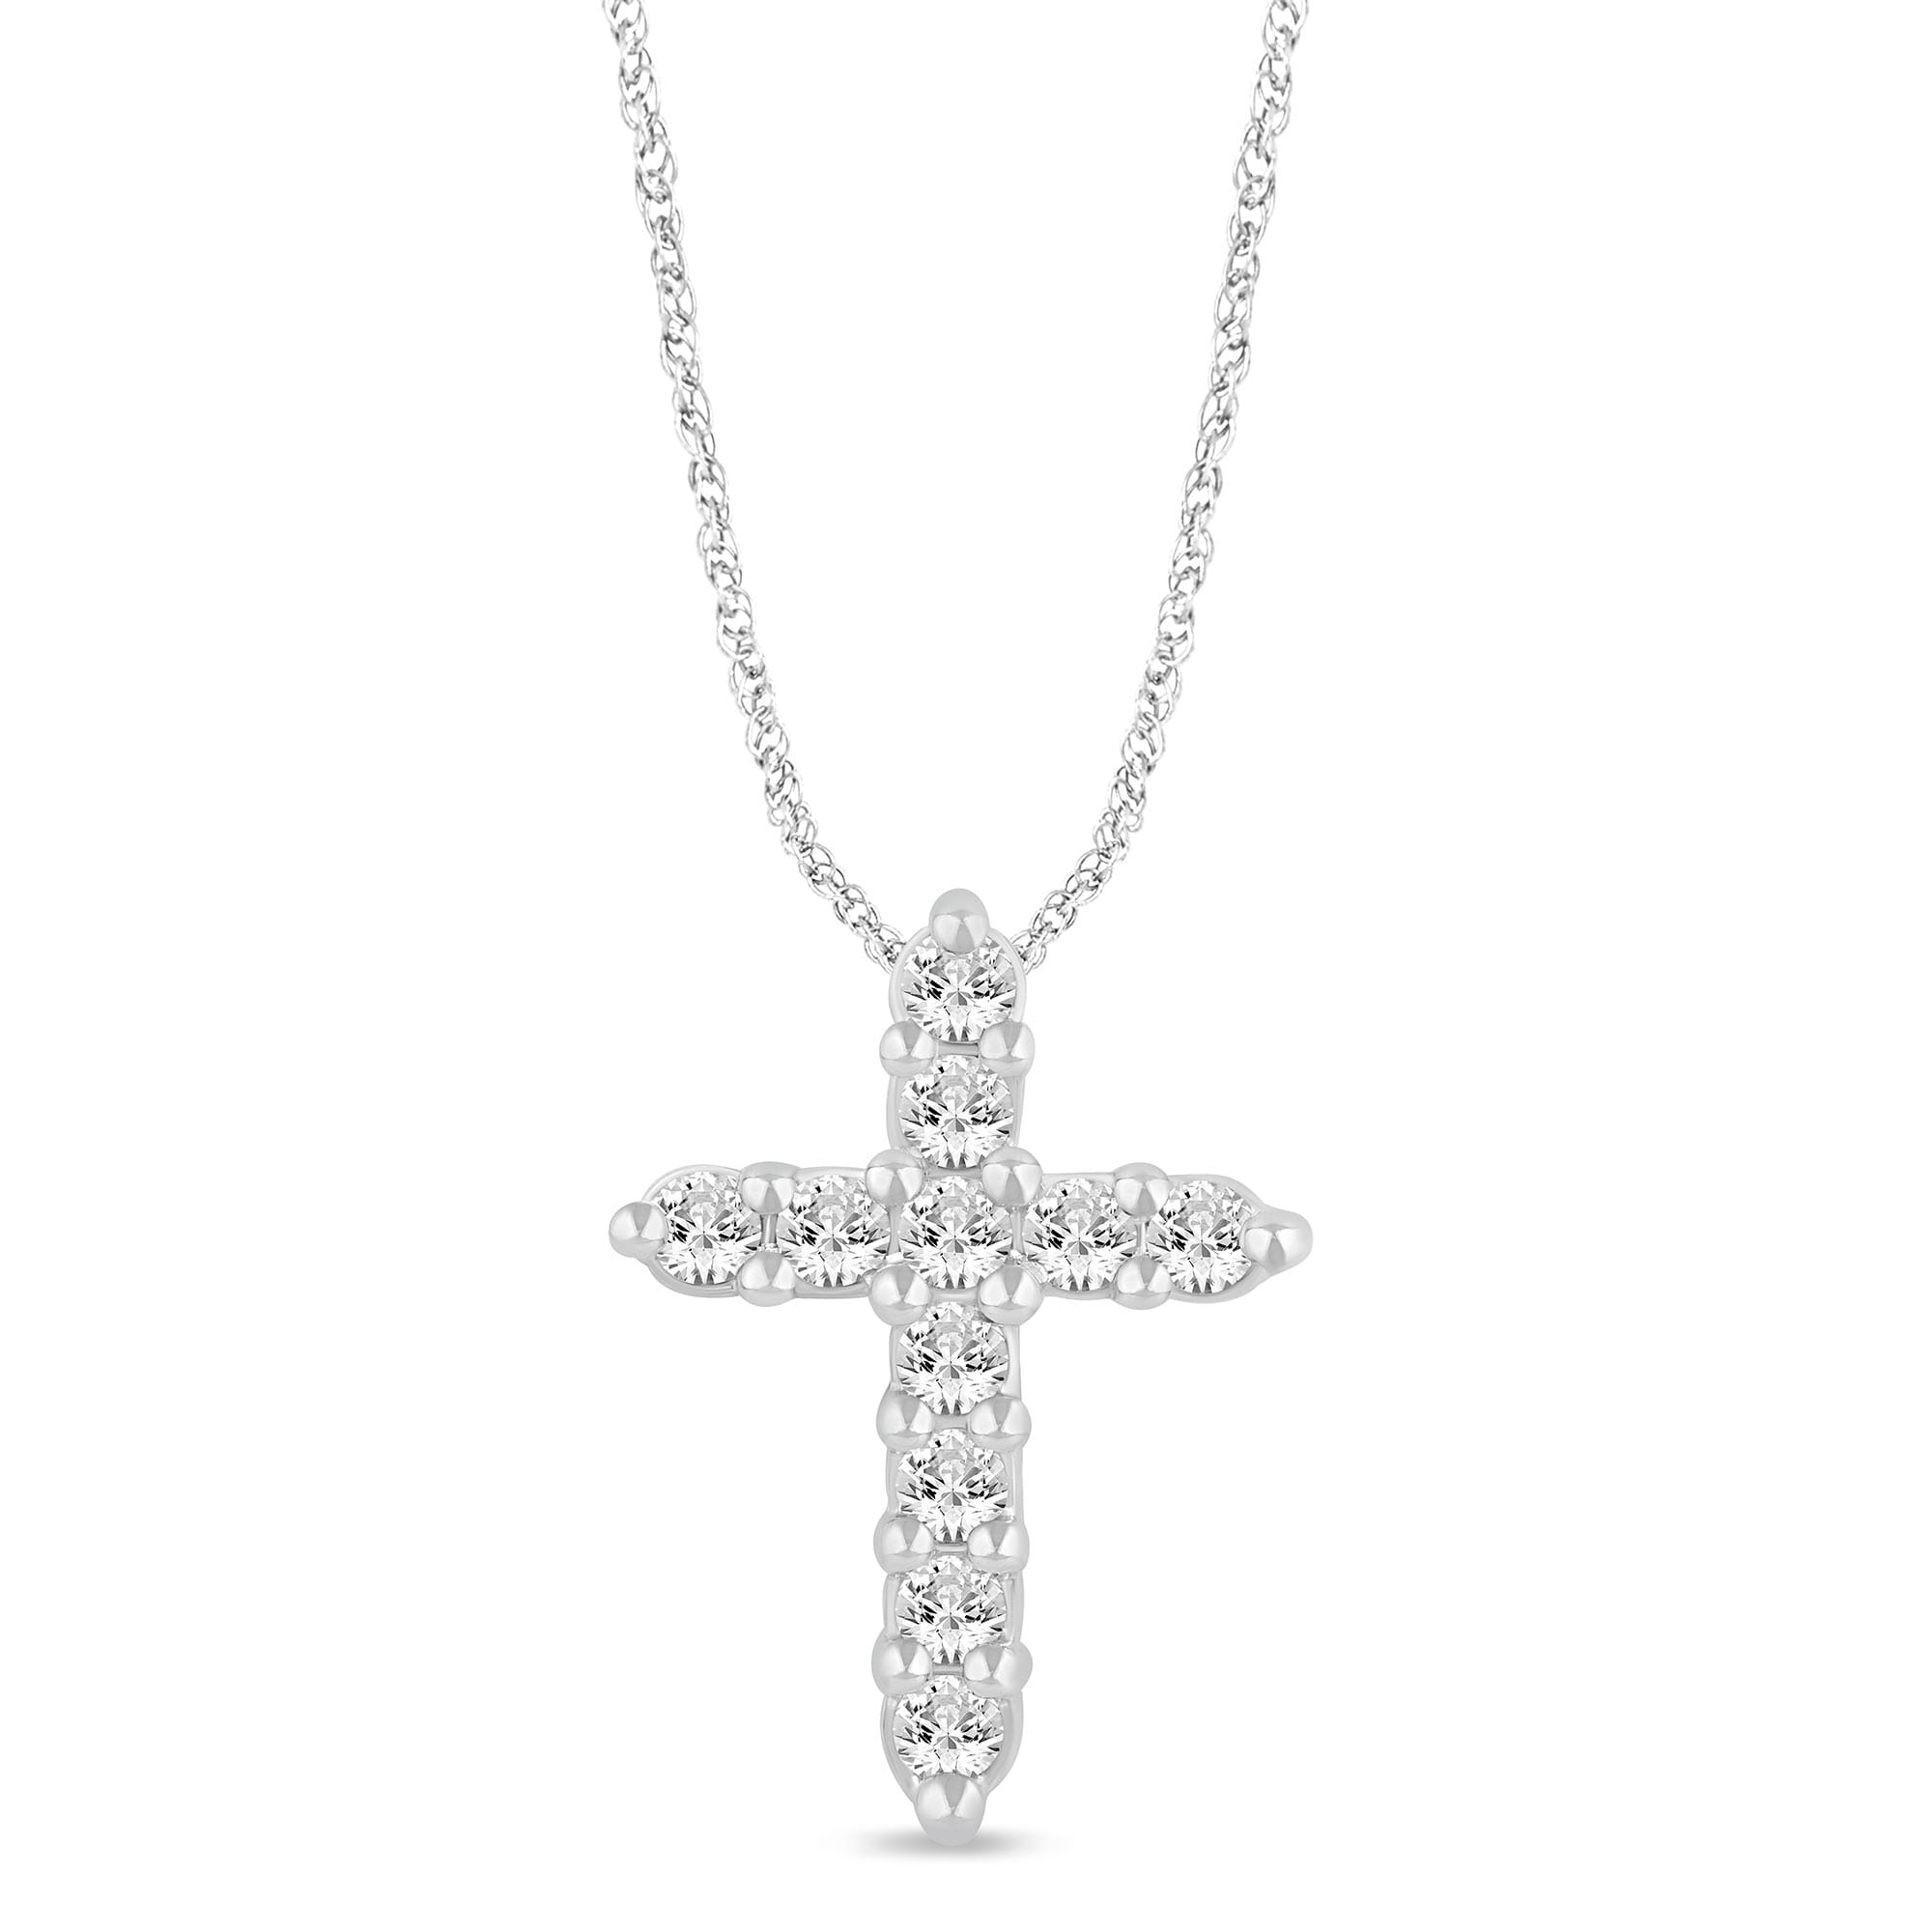 Meera Cross Necklace with 1/4ct of Laboratory Grown Diamonds in 9ct White Gold Necklaces Bevilles 